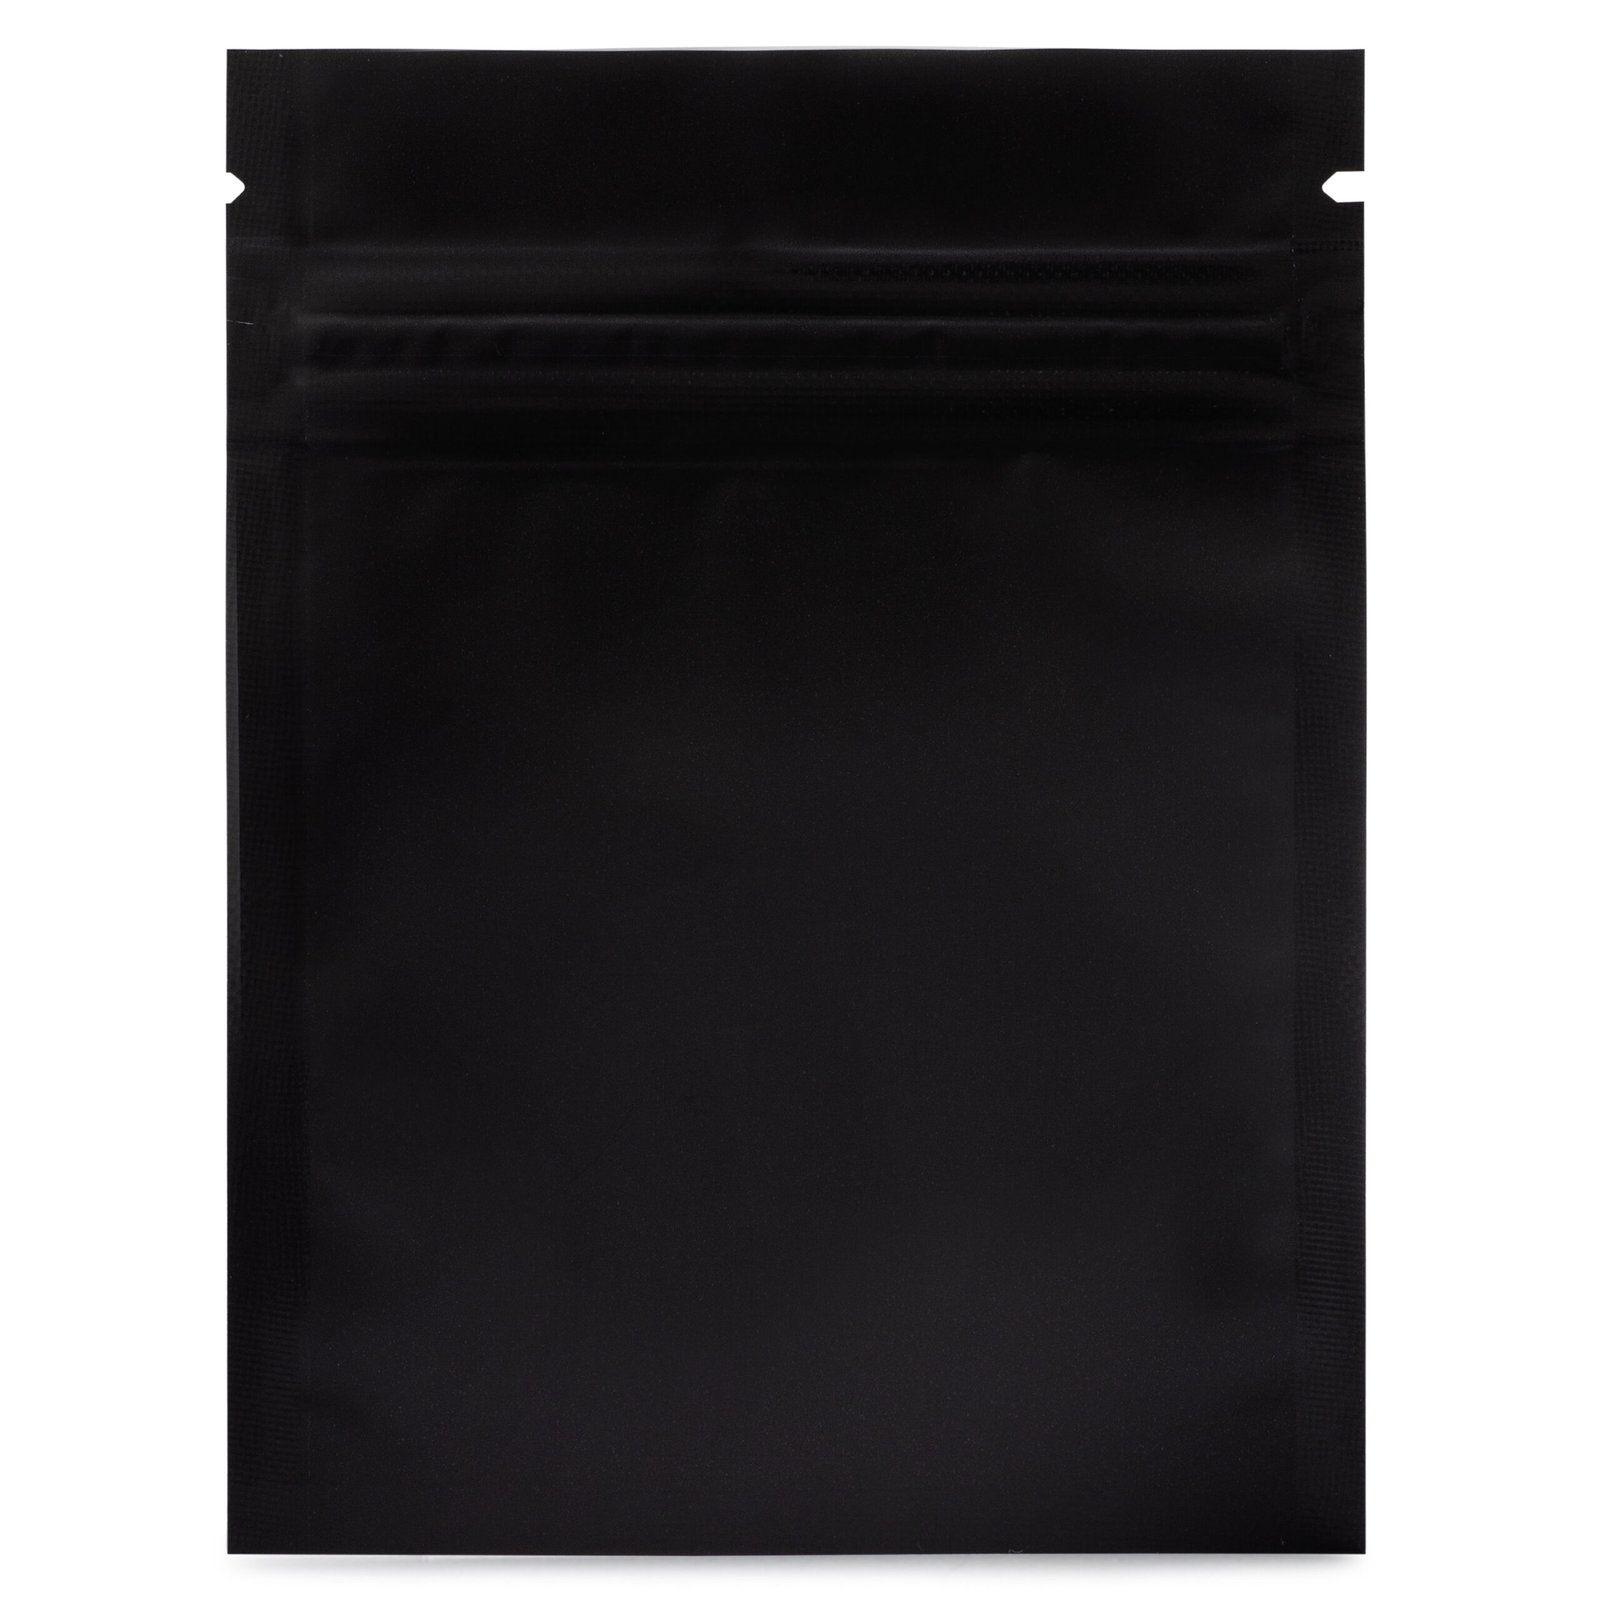  STUs 100 Pack Smell Proof Bags - 3.1 x 5.1 Inch